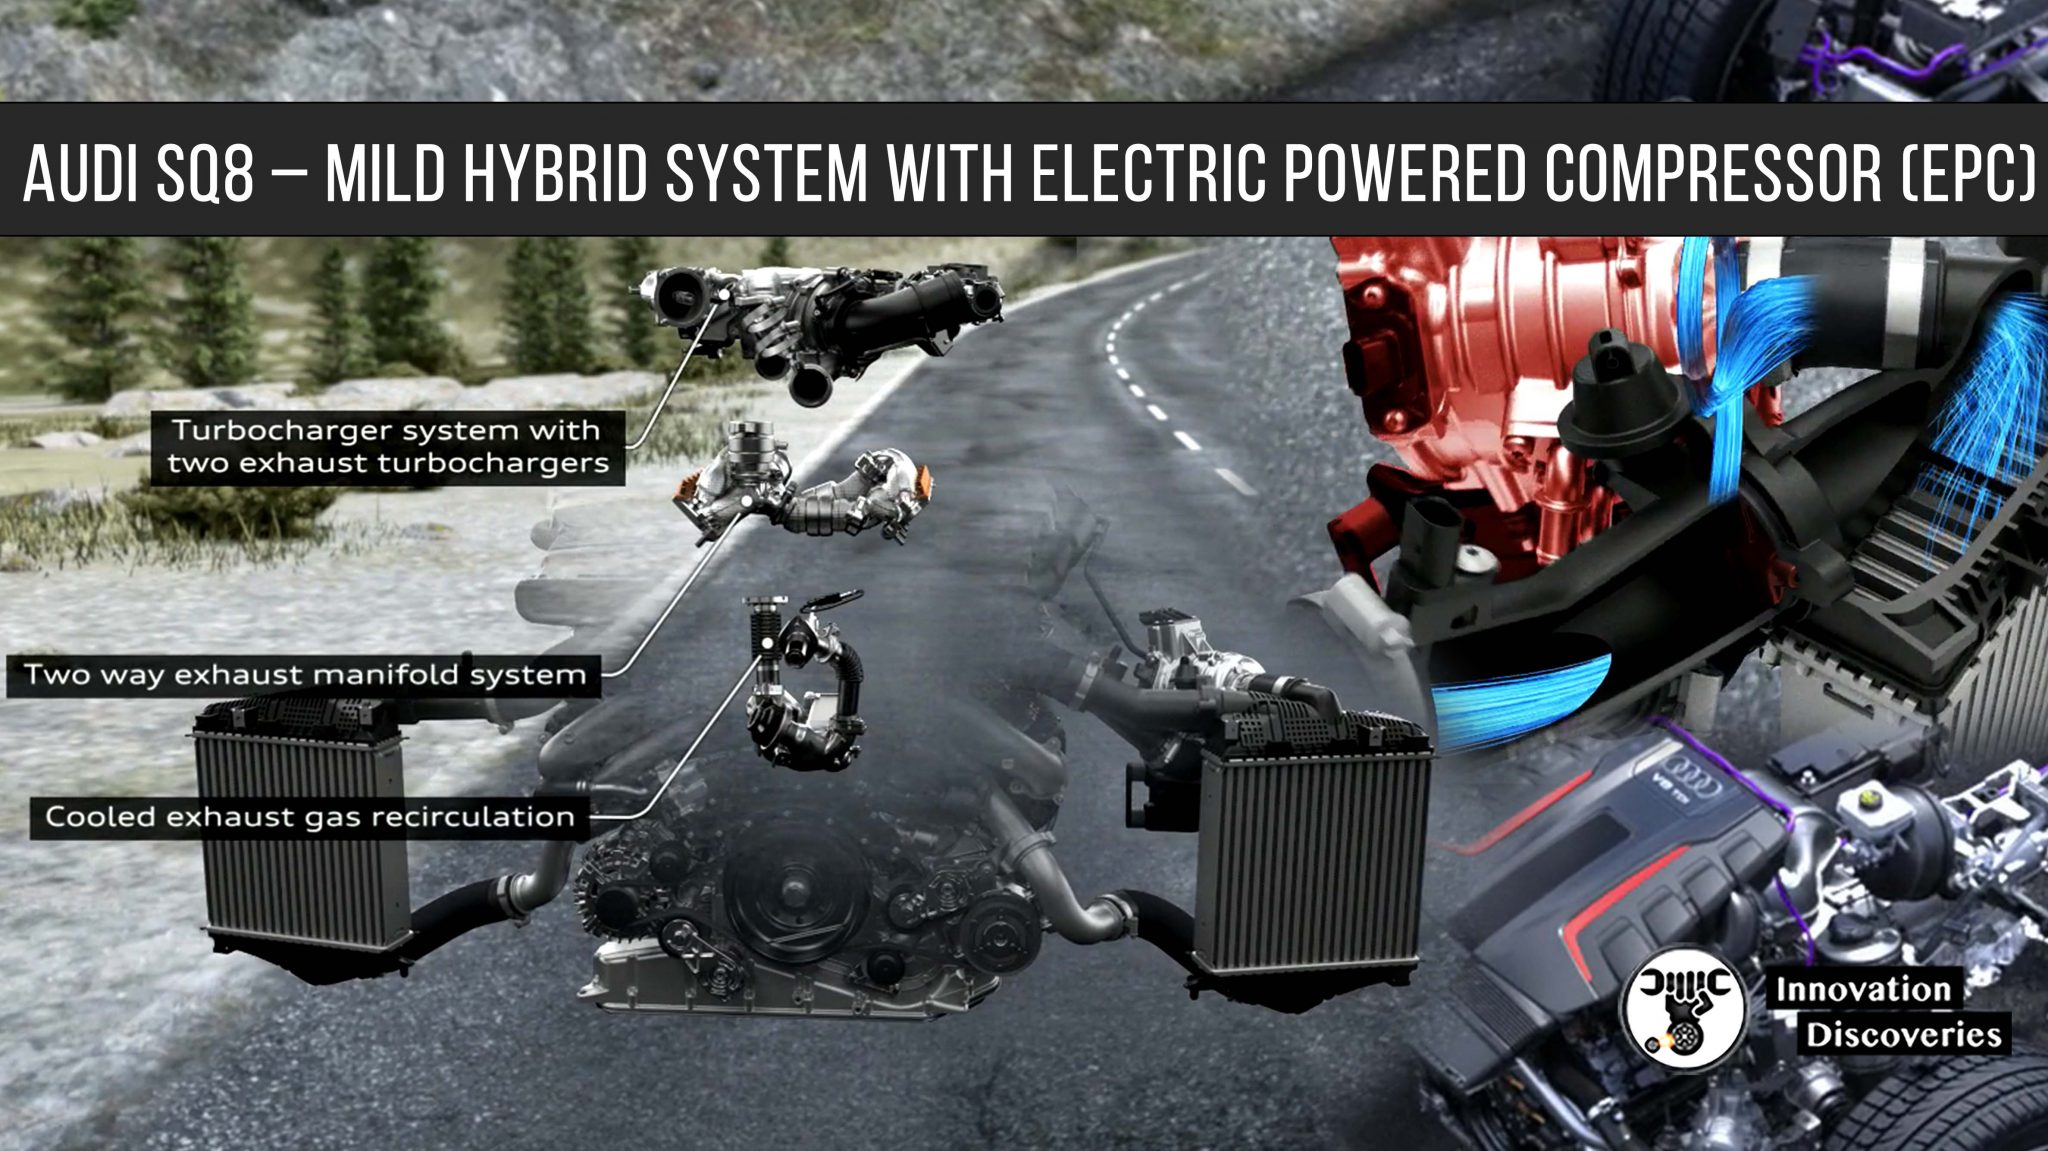 The Haldex All Wheel Drive System Everything You Need To Know